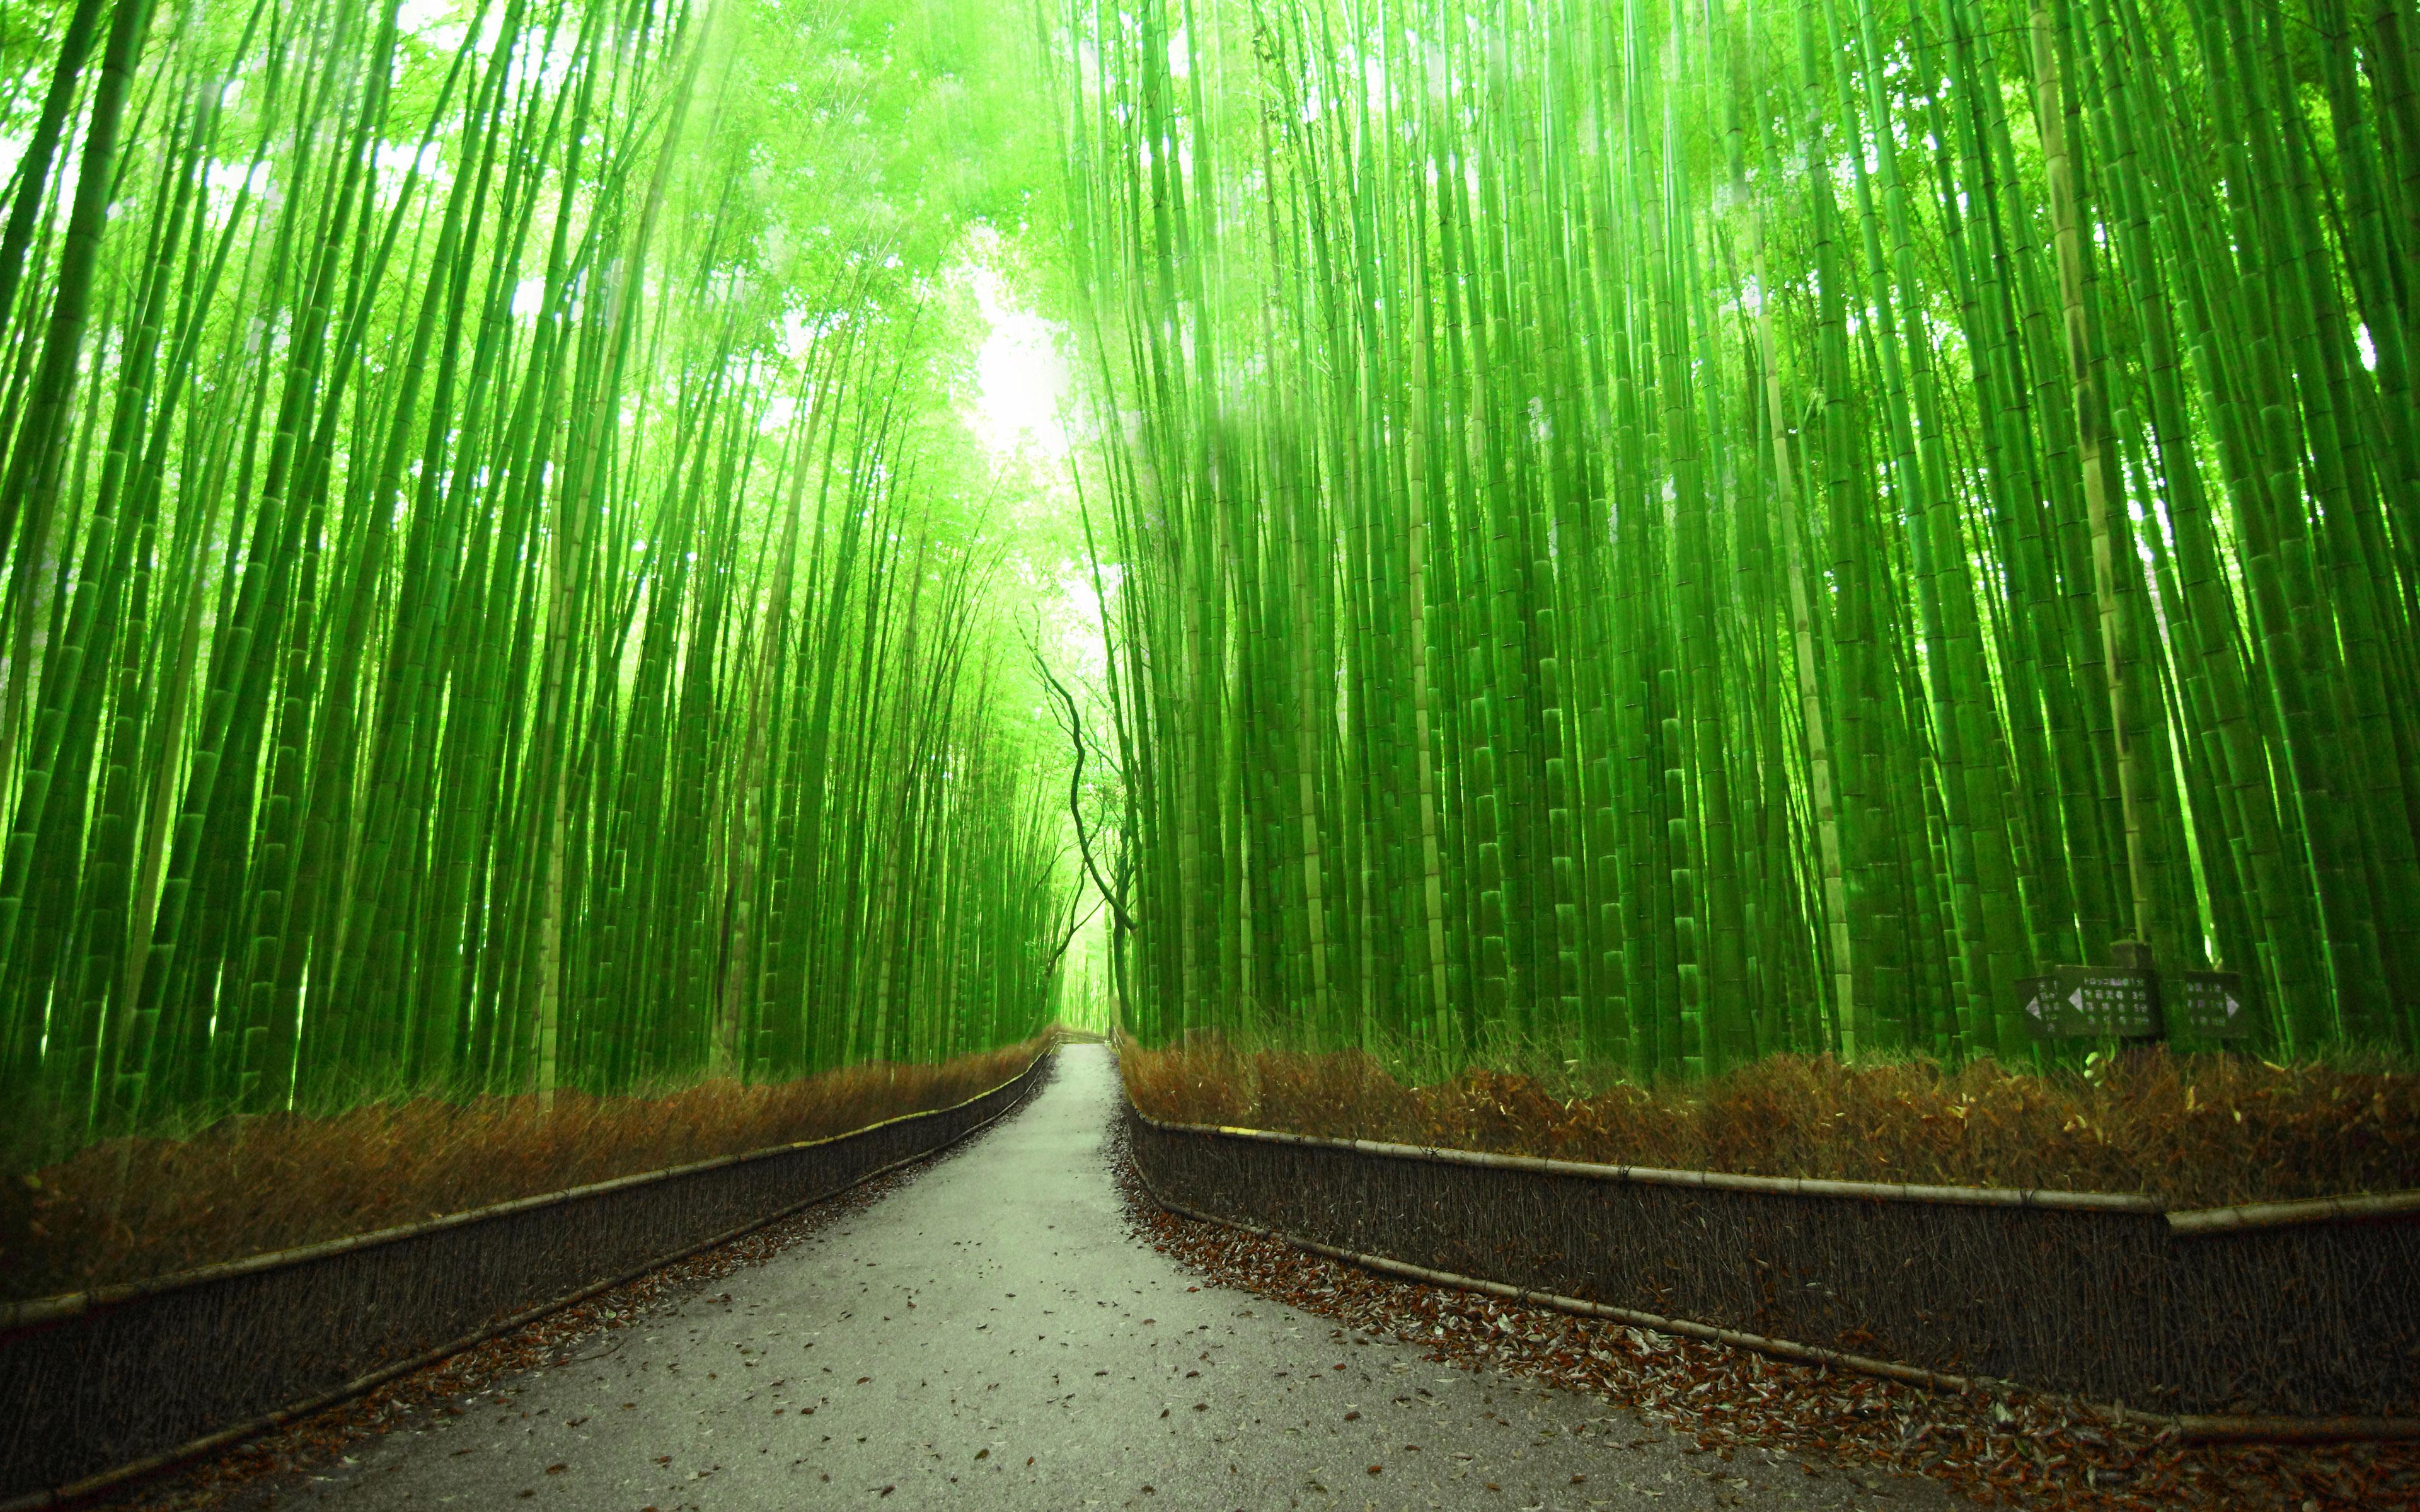 Bamboo Forest Wallpaper for Home